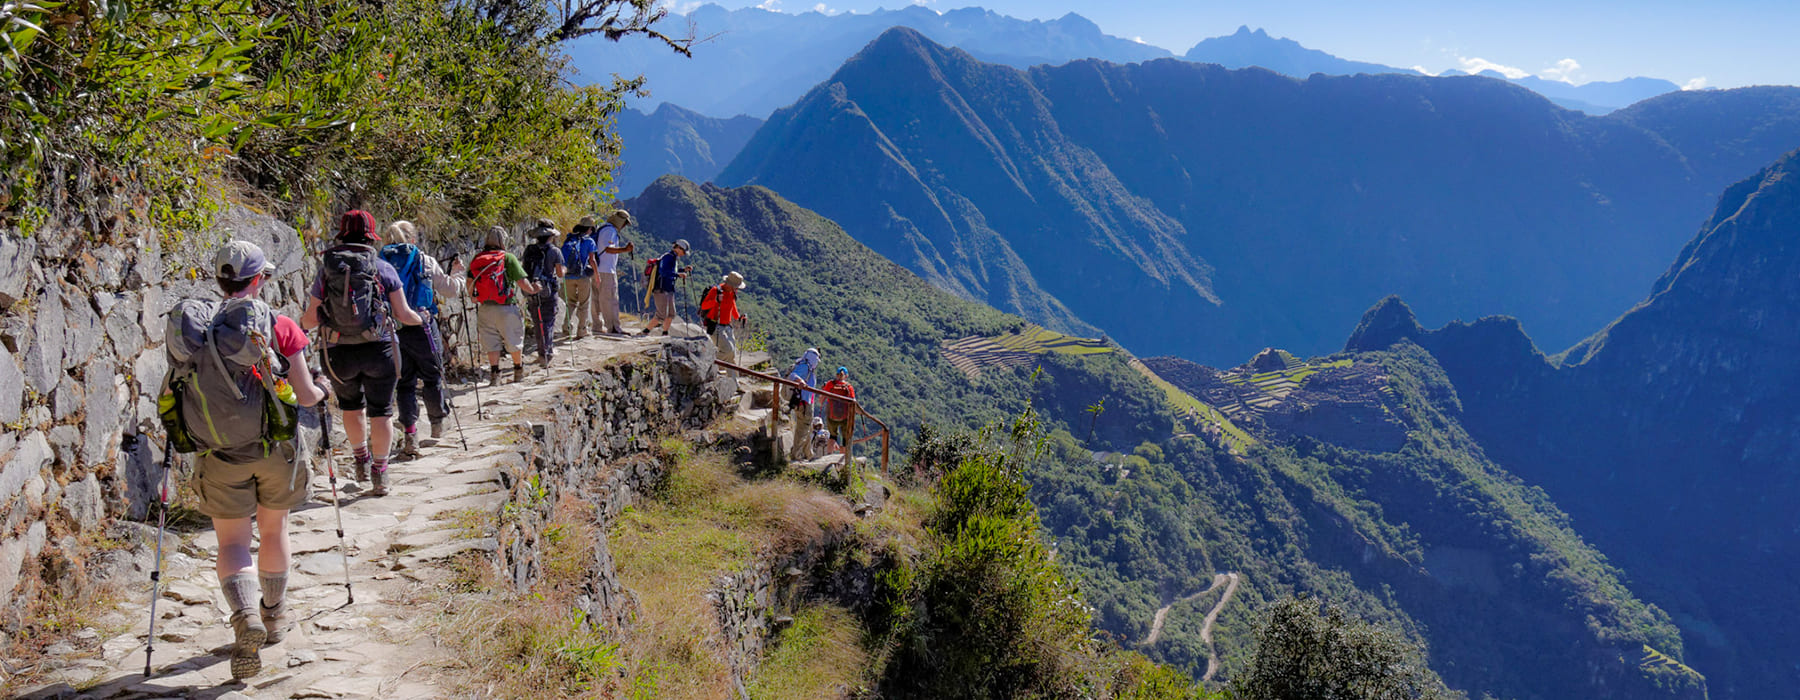 INCA TRAIL TO MACHU PICCHU: 10 THINGS YOU MUST KNOW